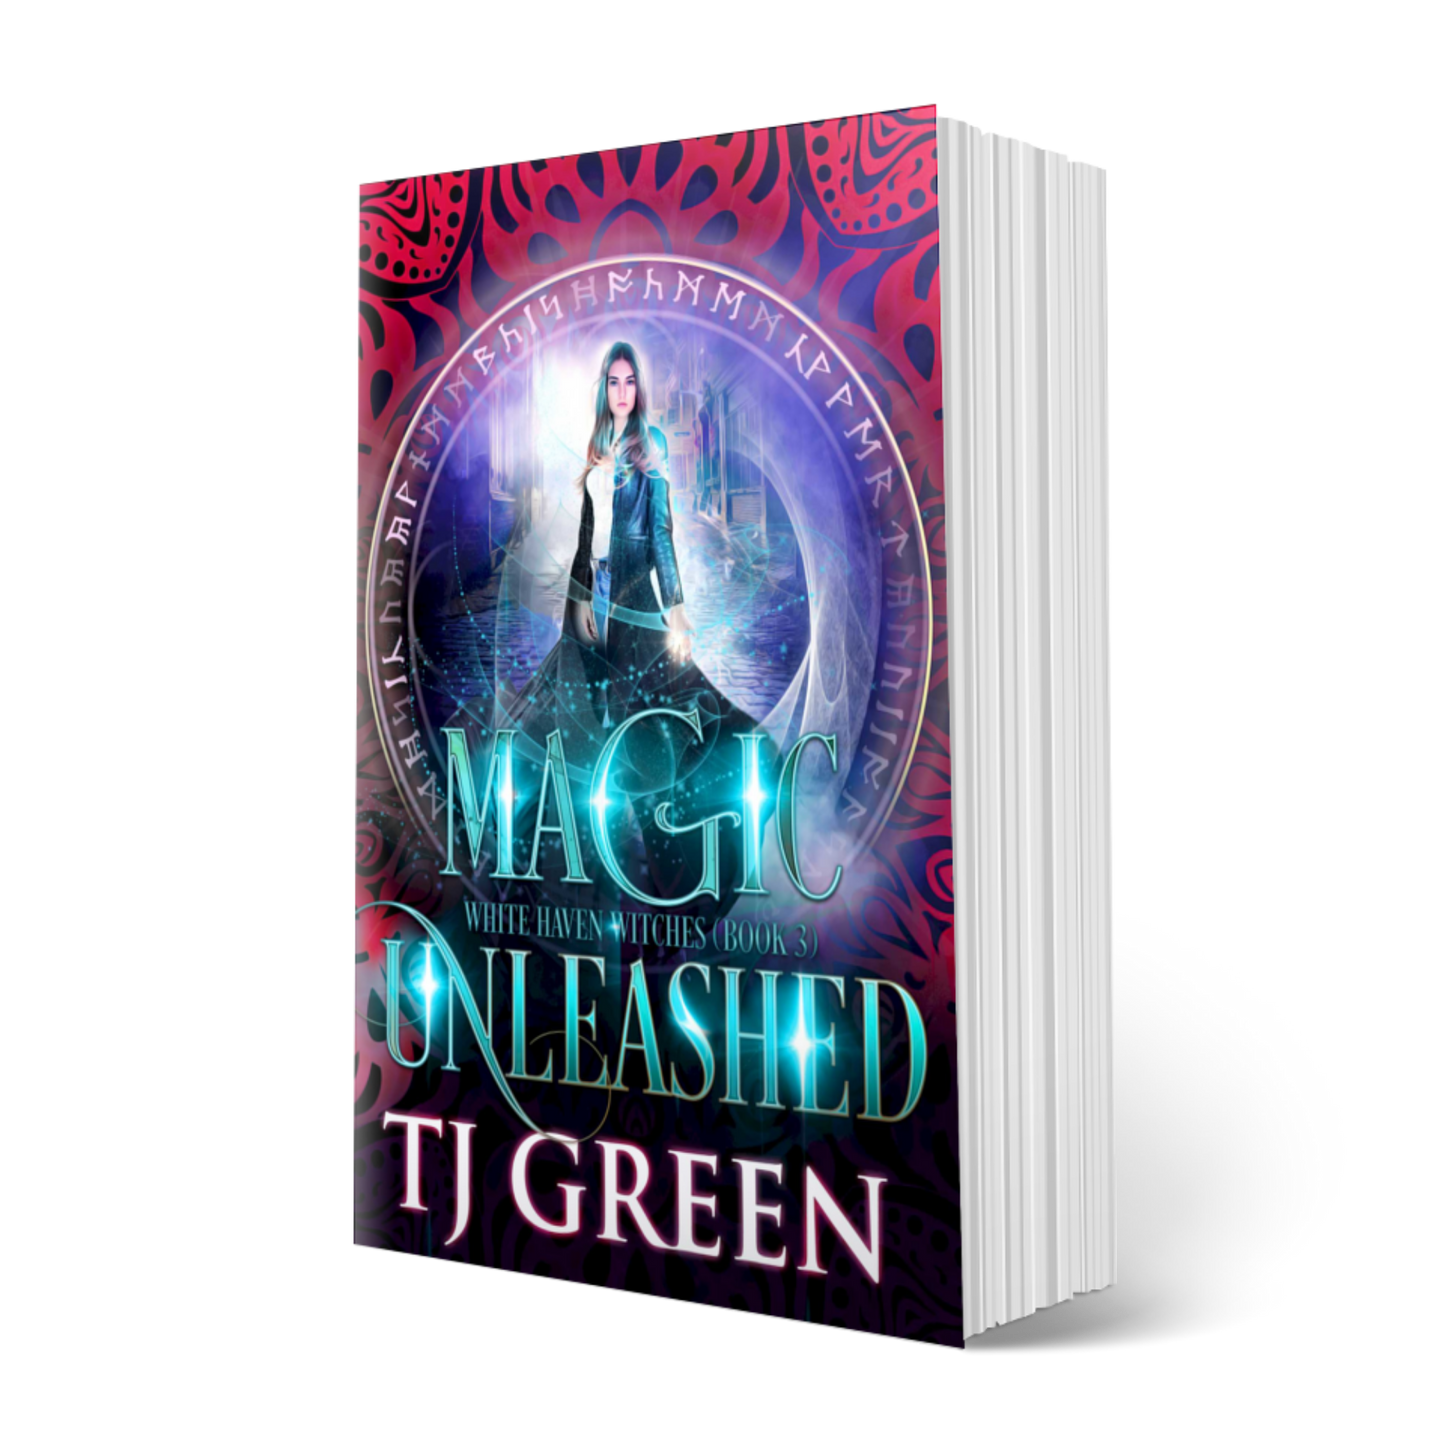 Magic Unleashed paperback, supernatural thriller, paranormal mystery, witch fiction